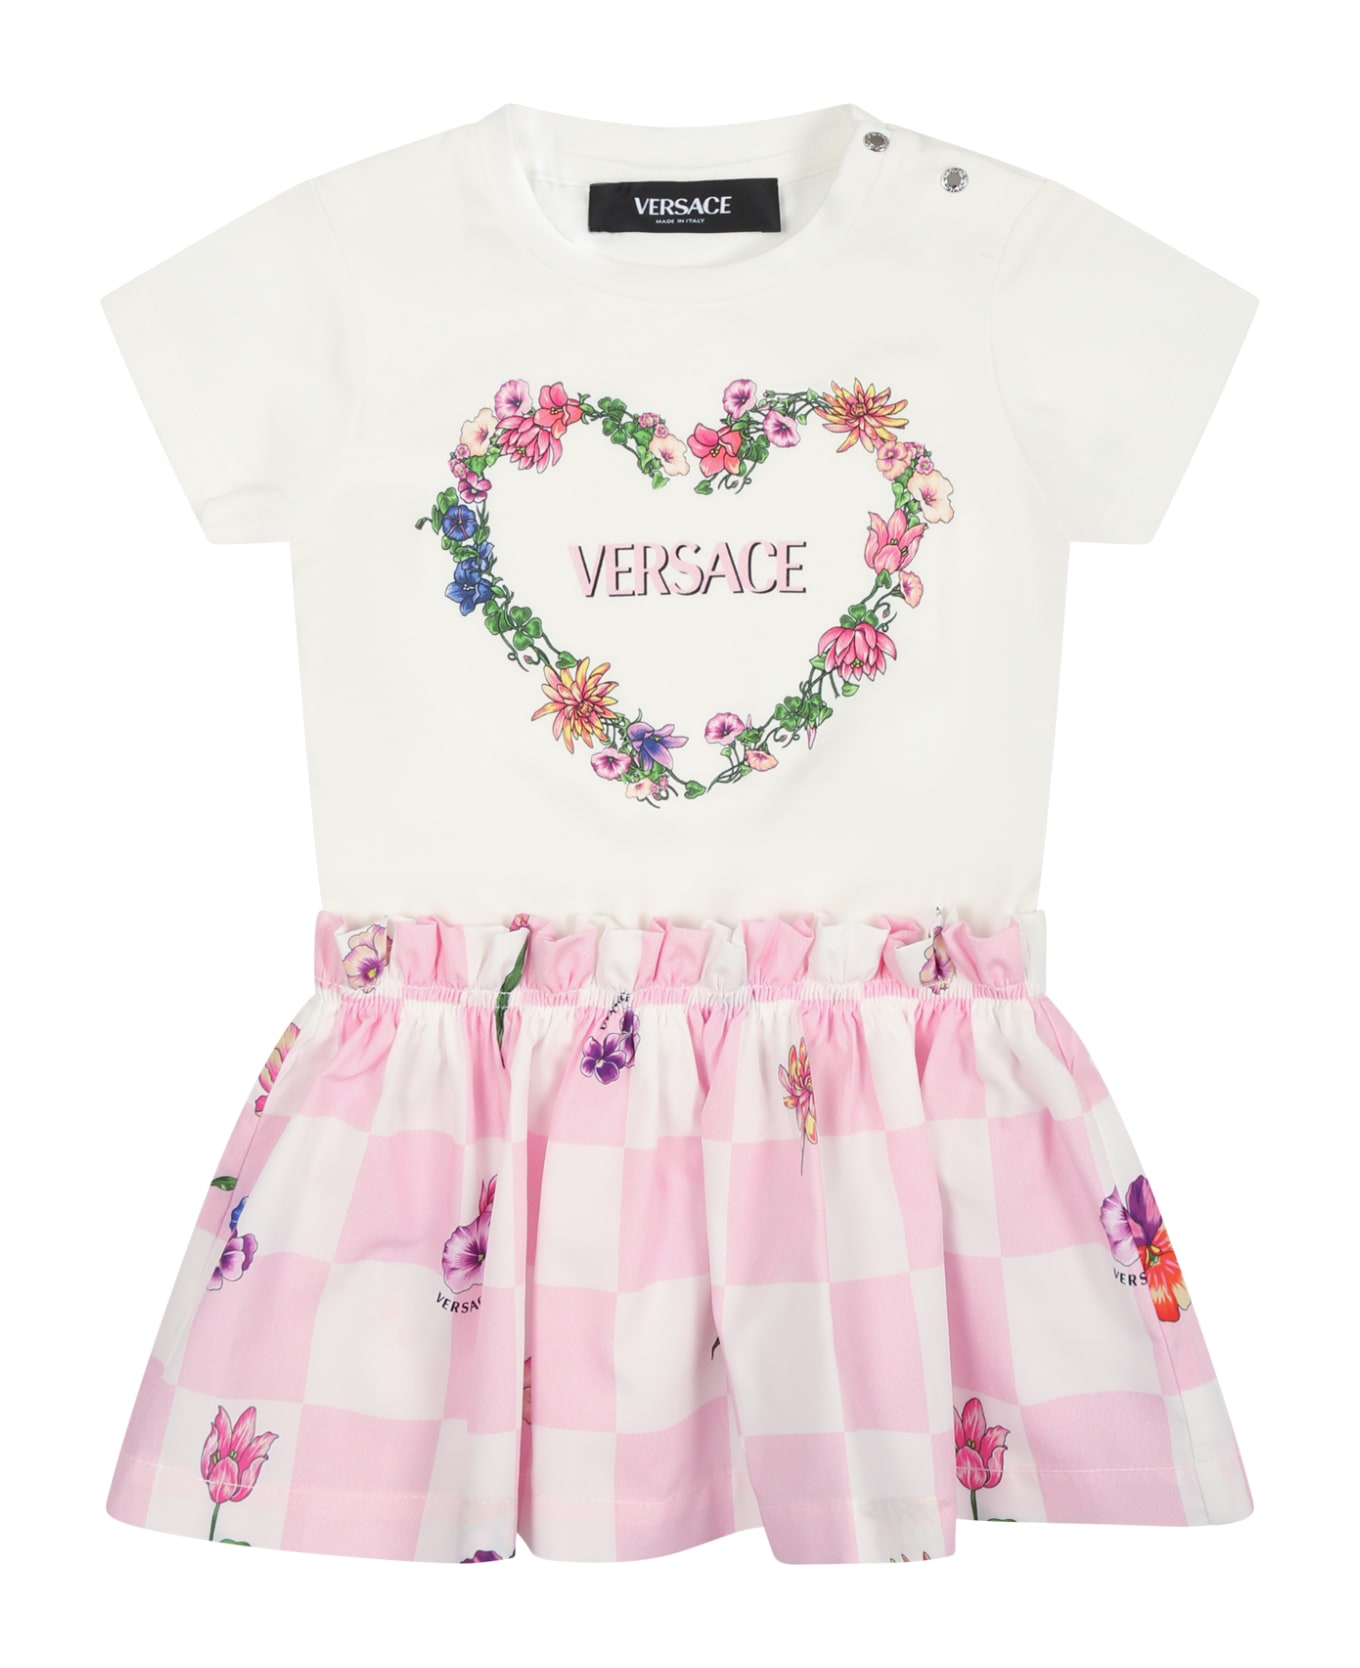 Versace White Dress For Baby Girl With Multicolor Print - White